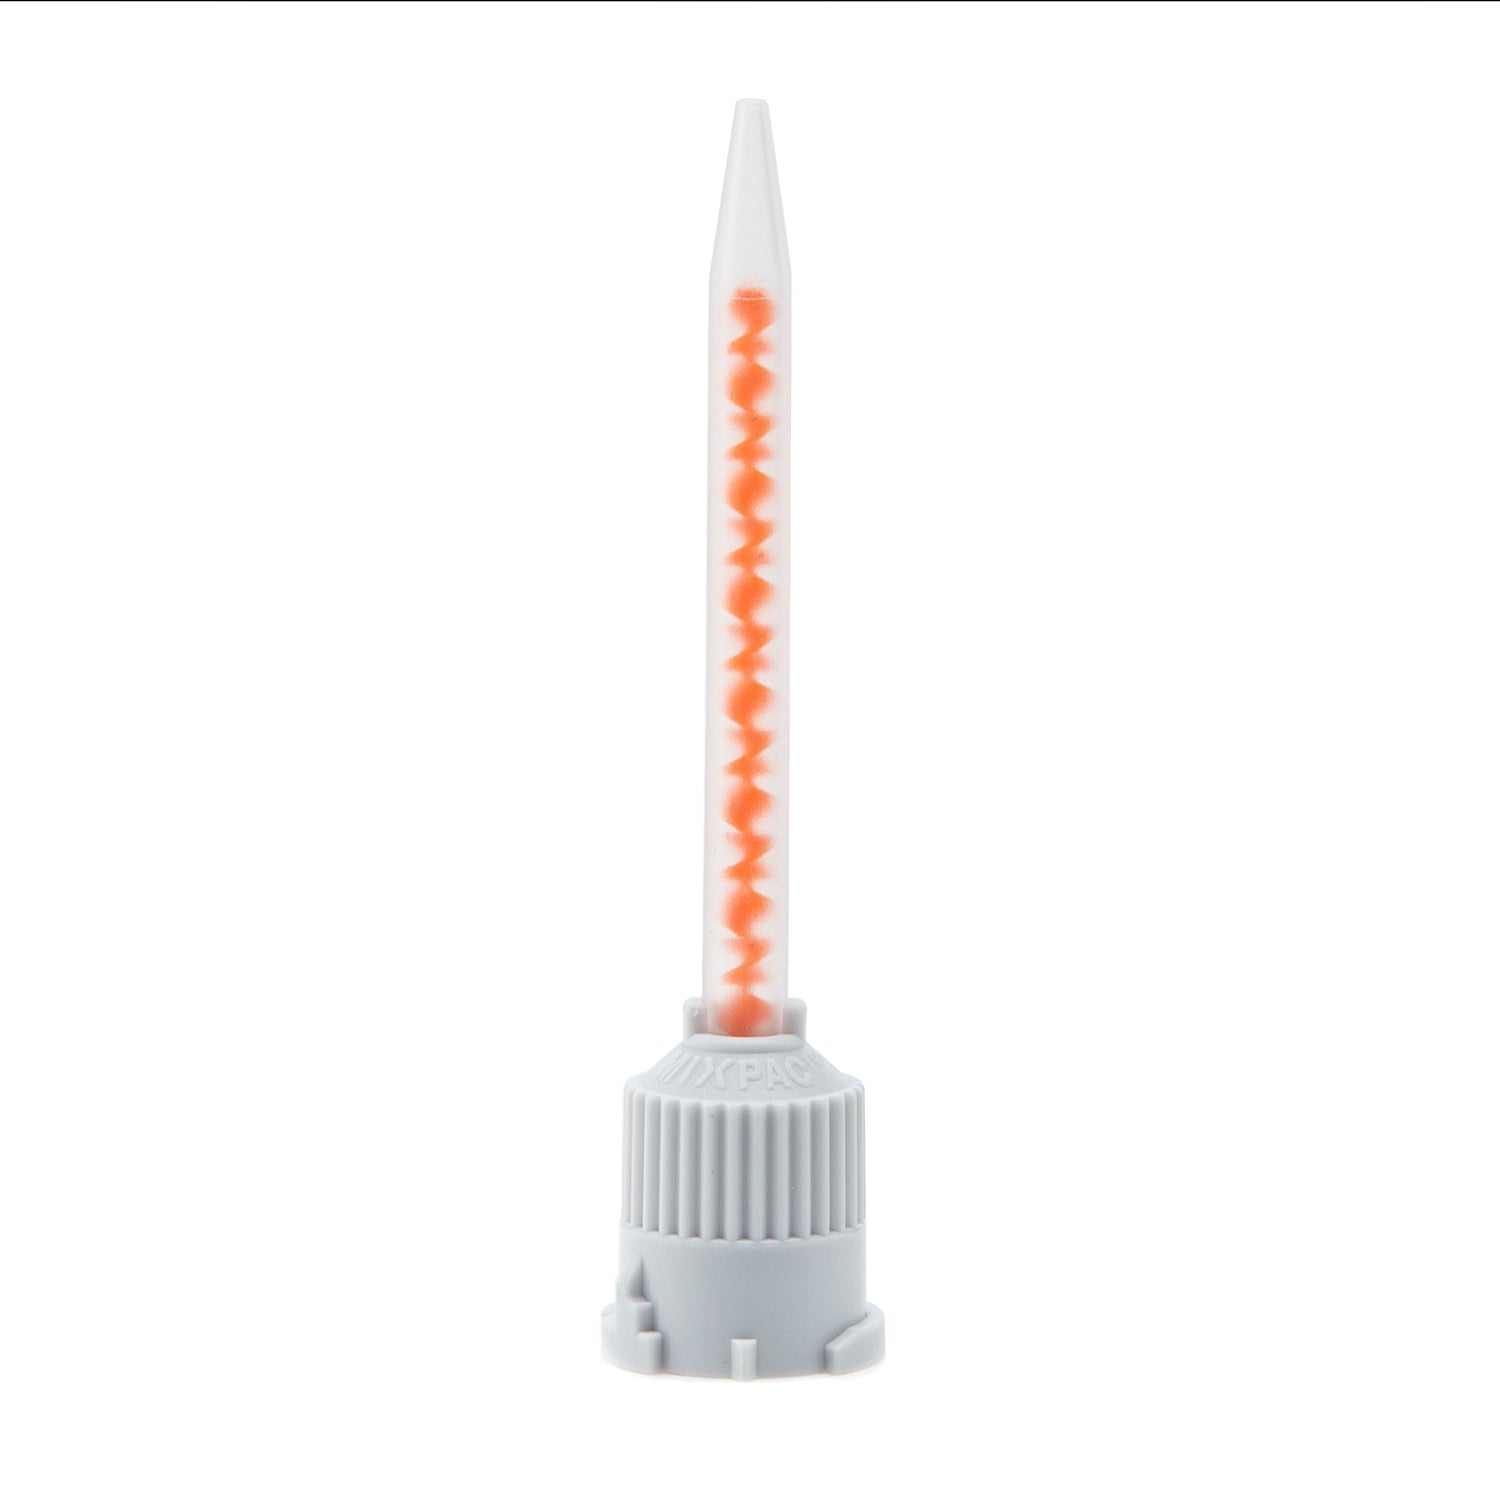 Loctite 3092™ Instant Adhesive - 10 g syringe – R/A Hoerr